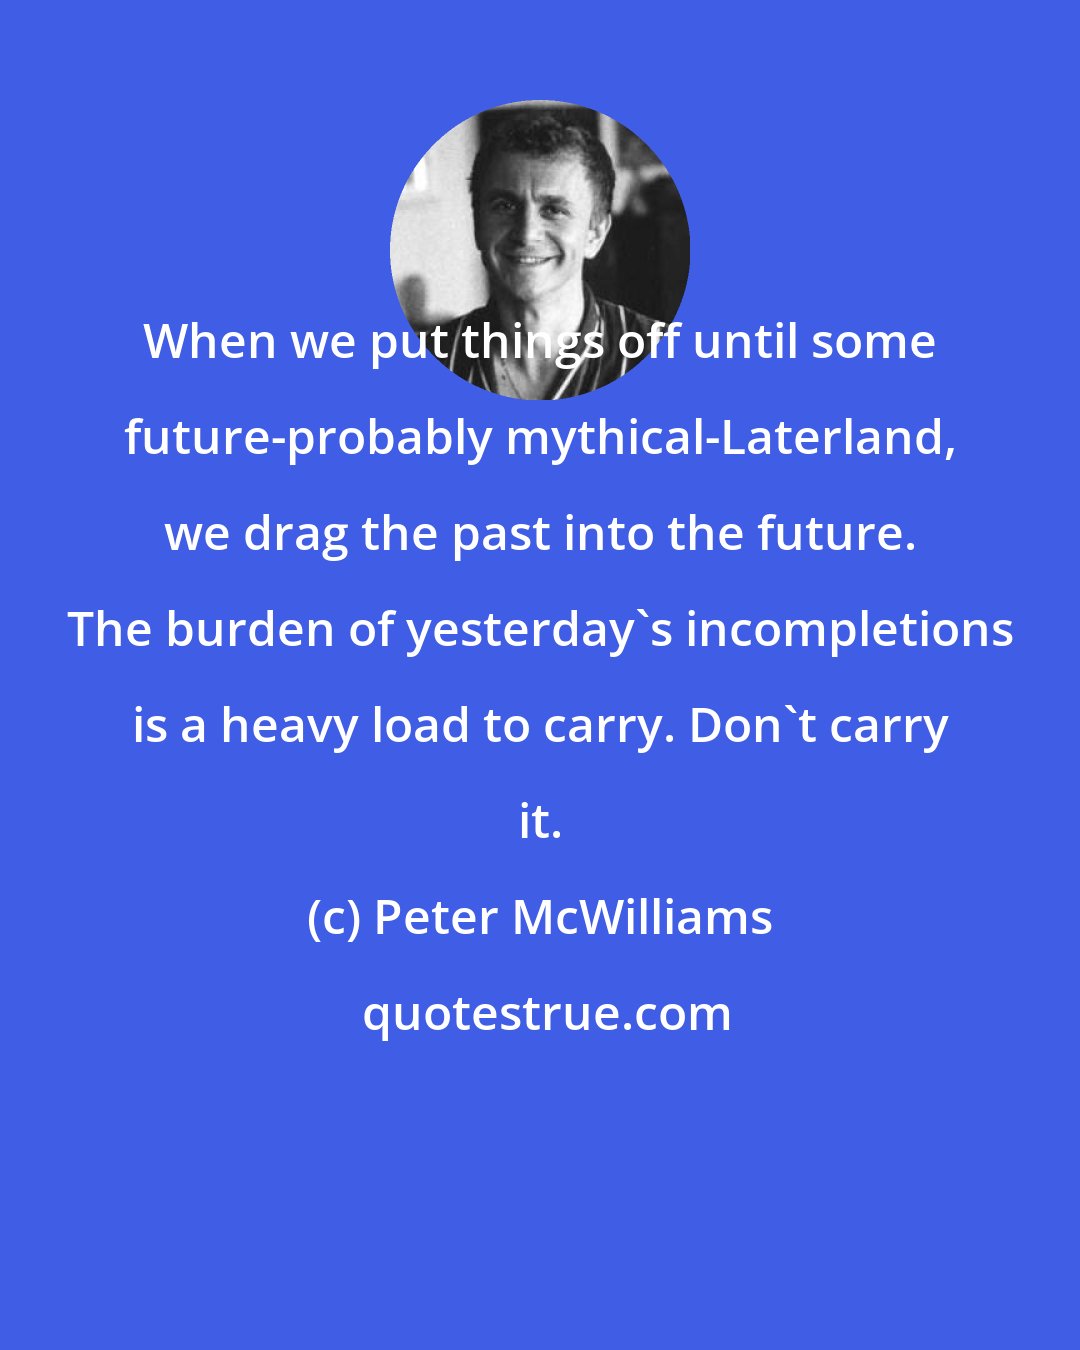 Peter McWilliams: When we put things off until some future-probably mythical-Laterland, we drag the past into the future. The burden of yesterday's incompletions is a heavy load to carry. Don't carry it.